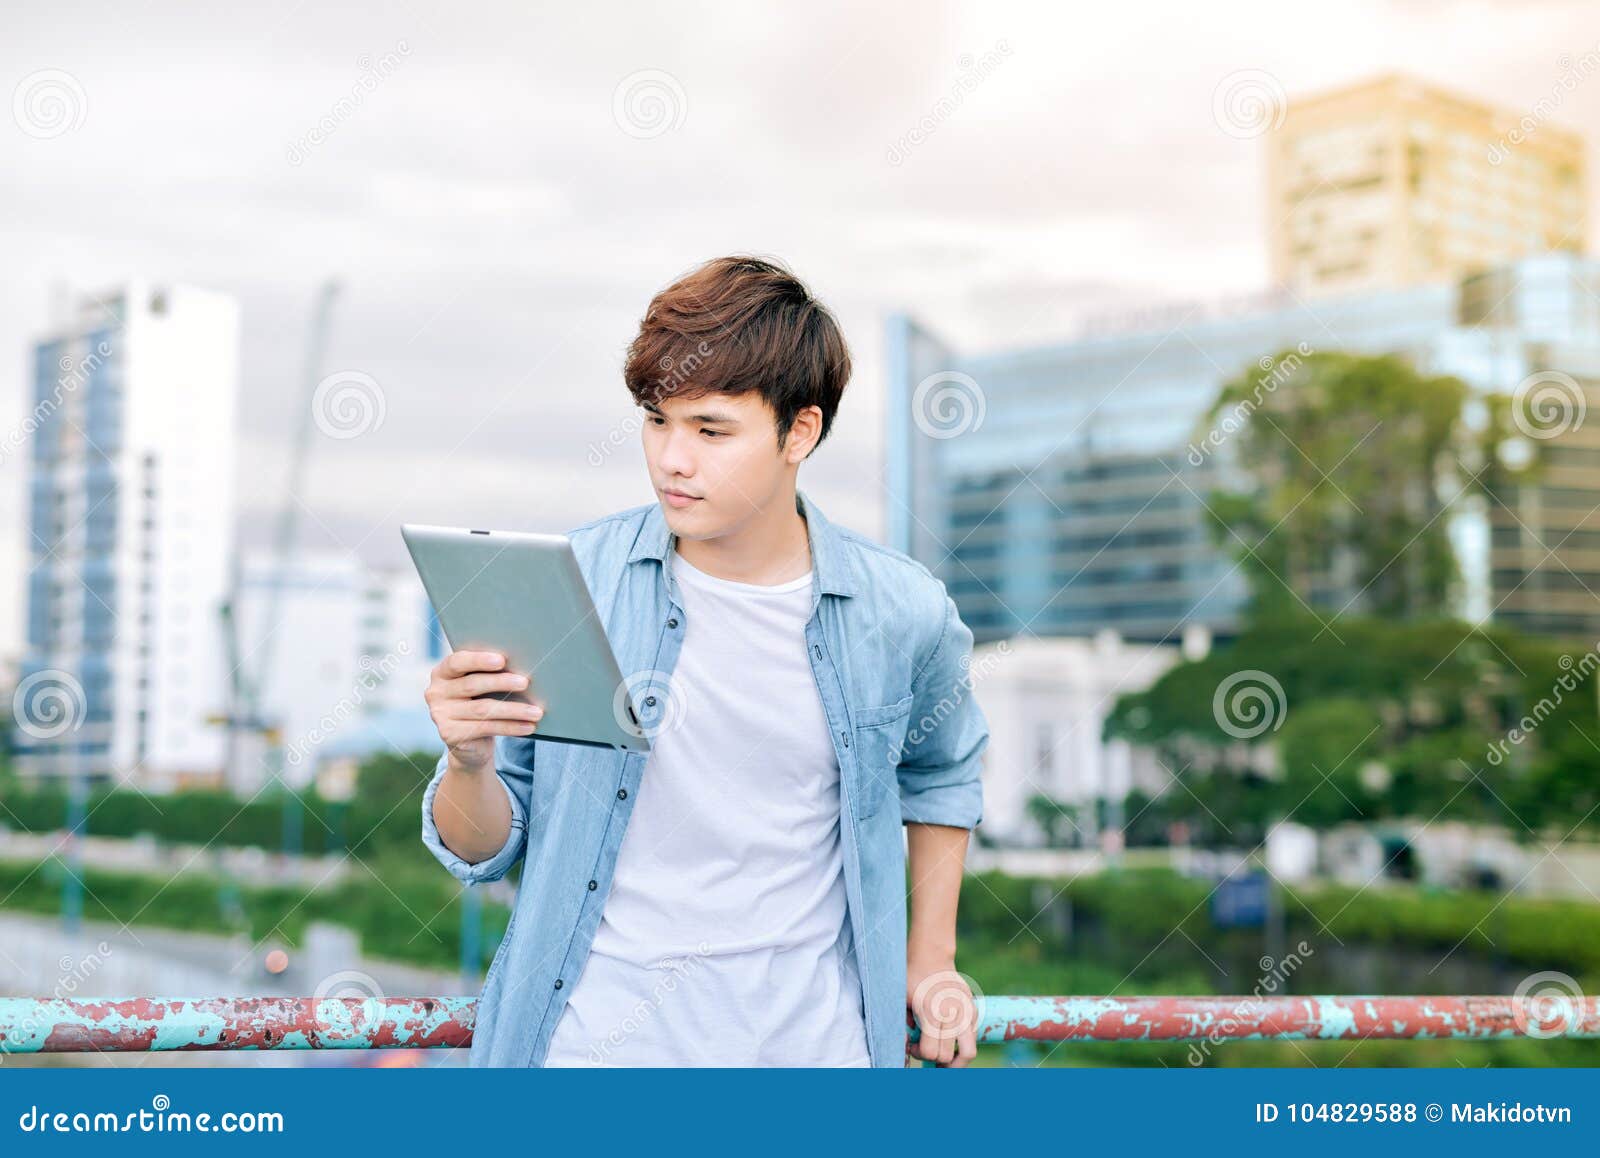 young asian man tourist using digita; tablet outdoor in the city